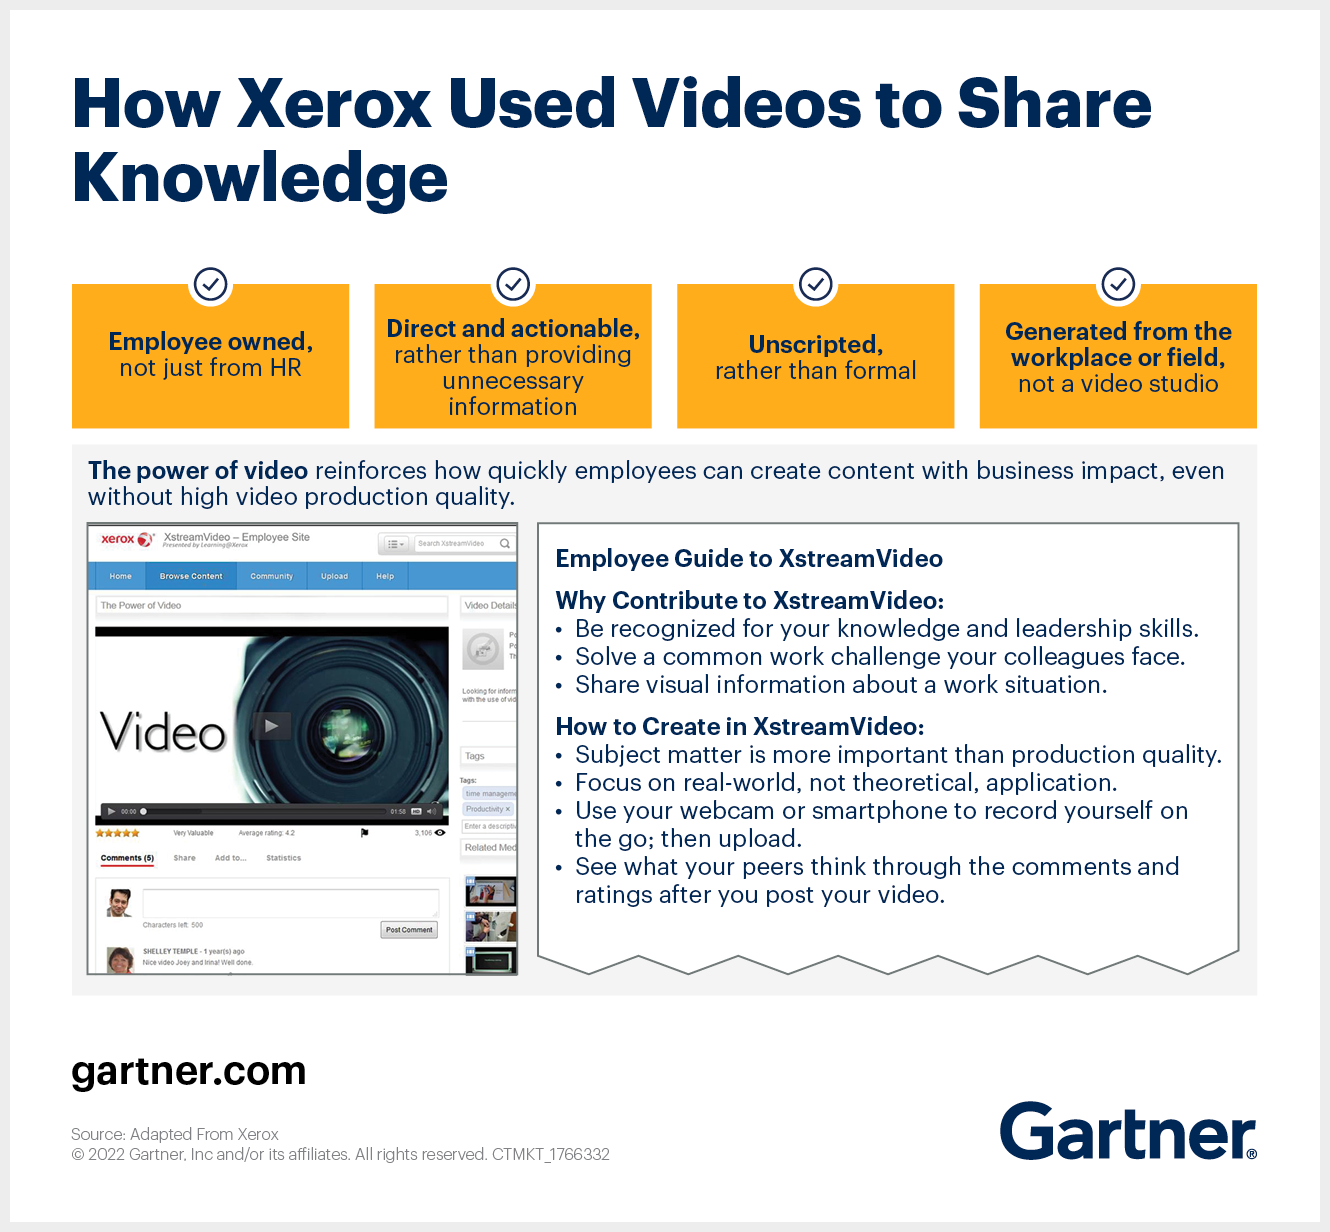 How Xerox Used Videos to Share Knowledge